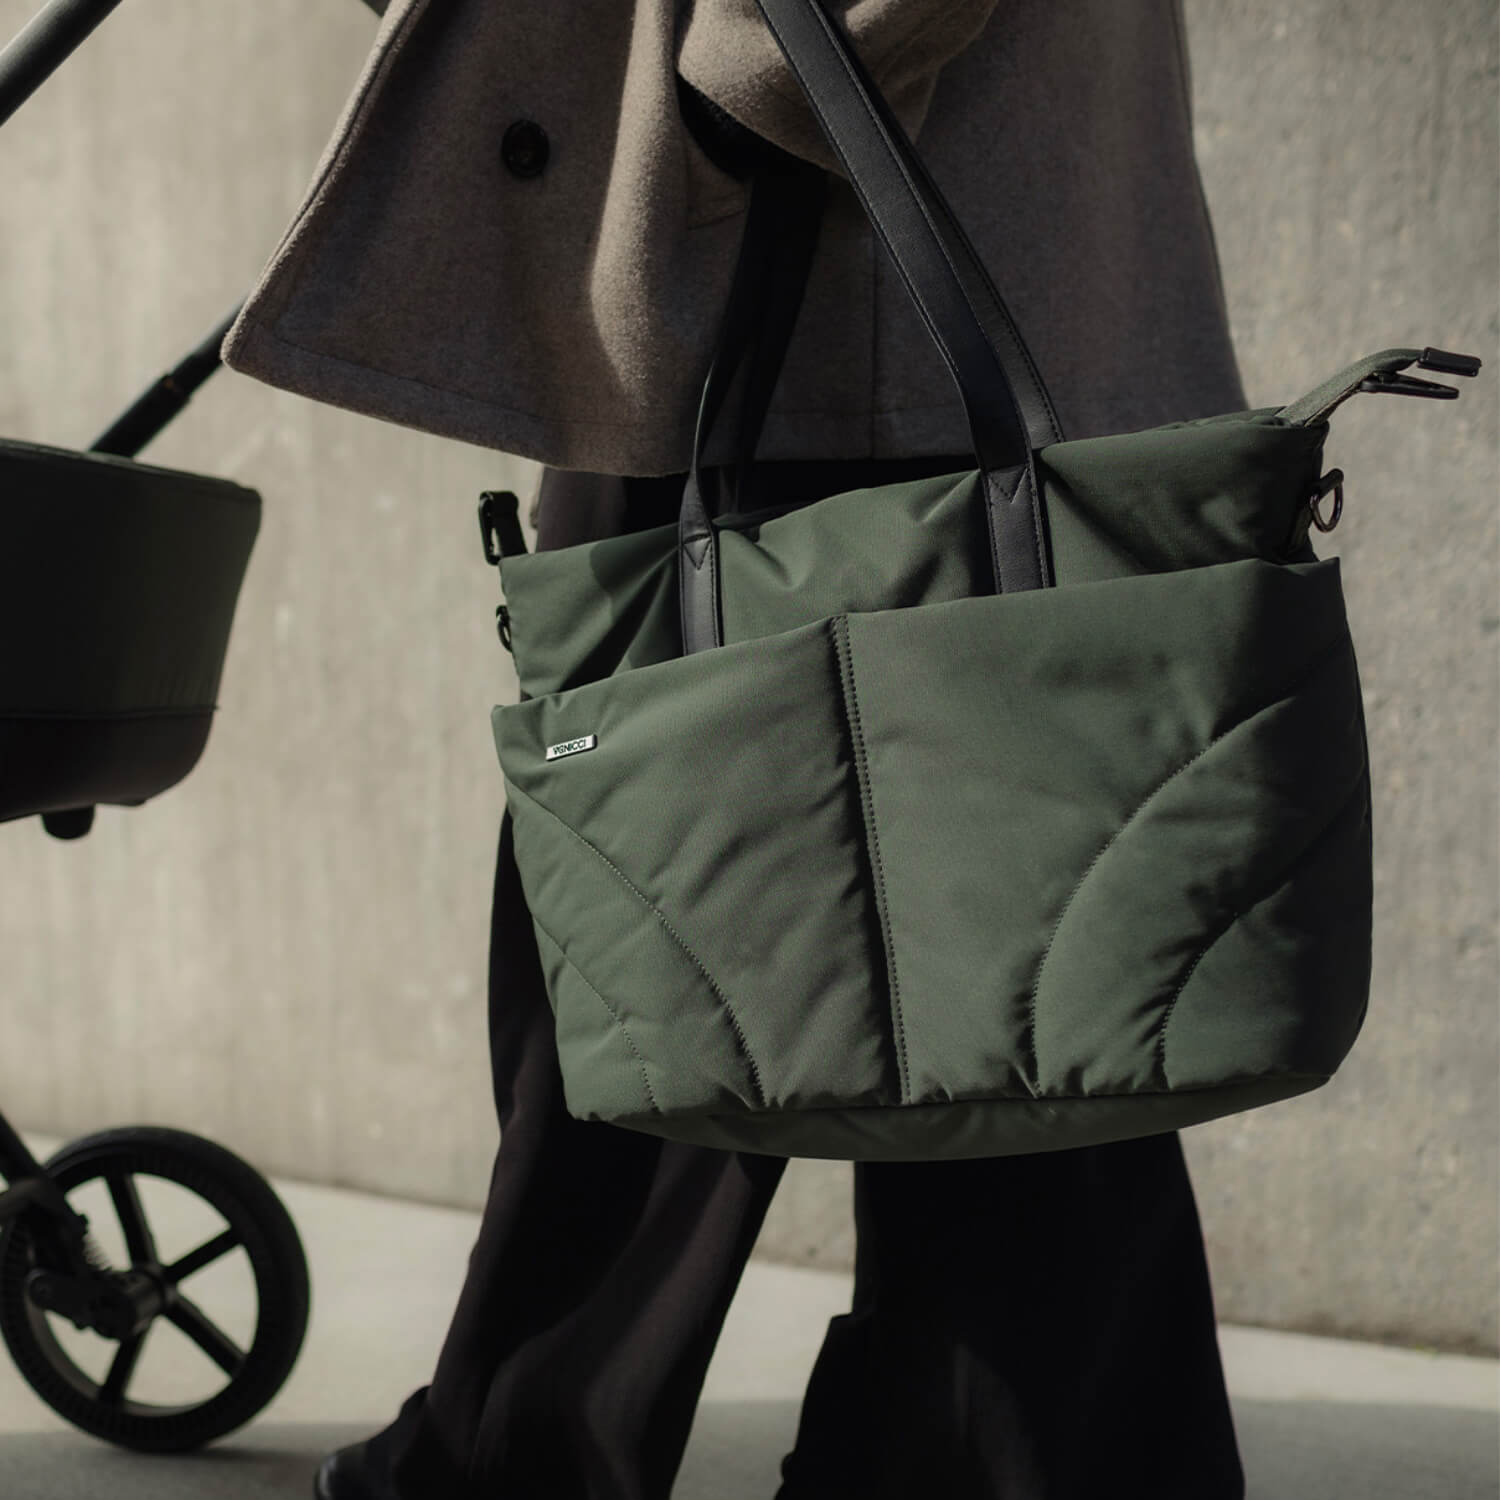 Person carrying the Venicci Claro bag in Forest green colour